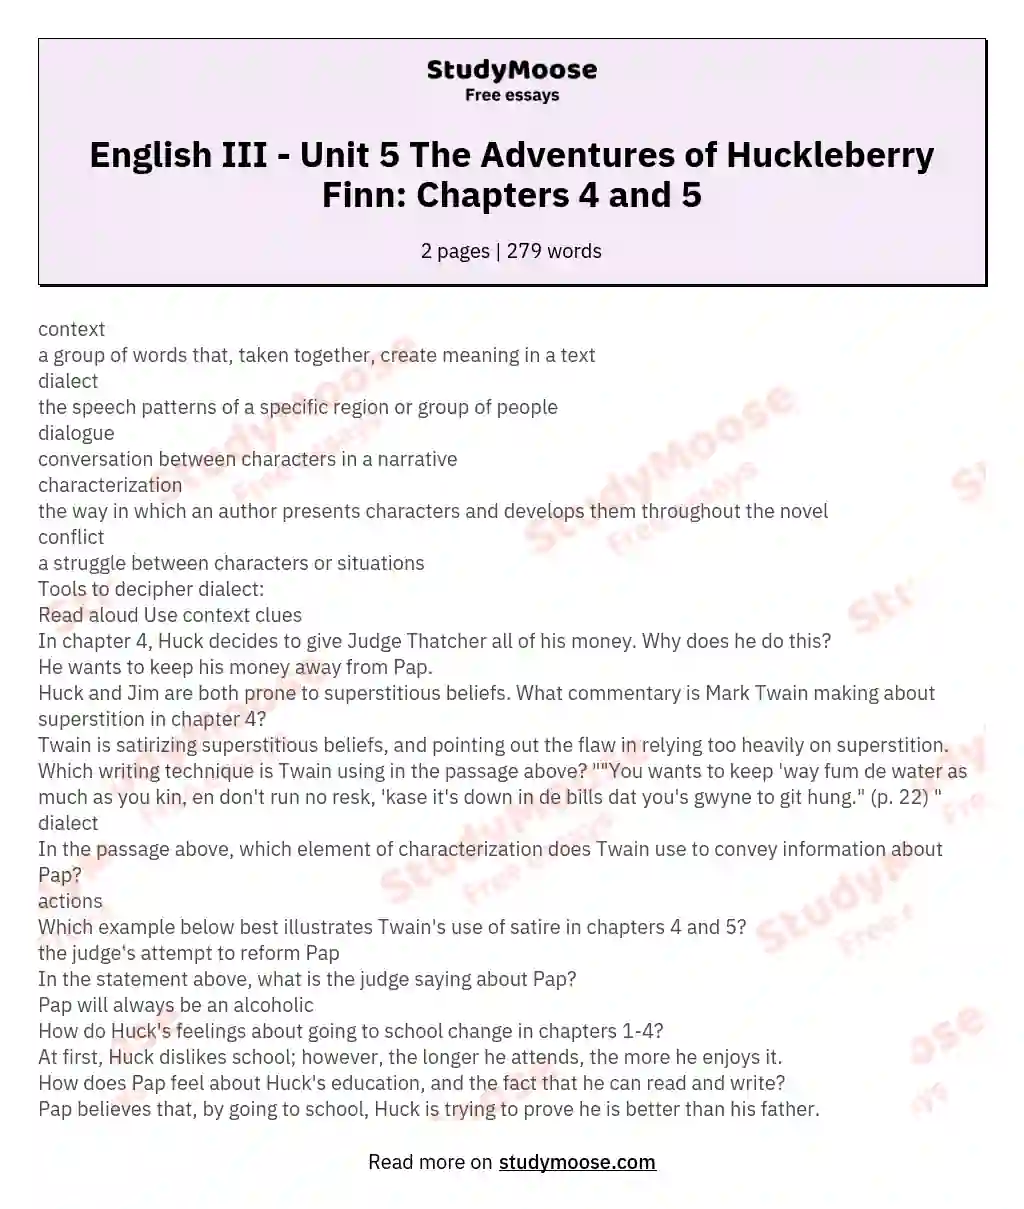 English III - Unit 5  The Adventures of Huckleberry Finn: Chapters 4 and 5 essay